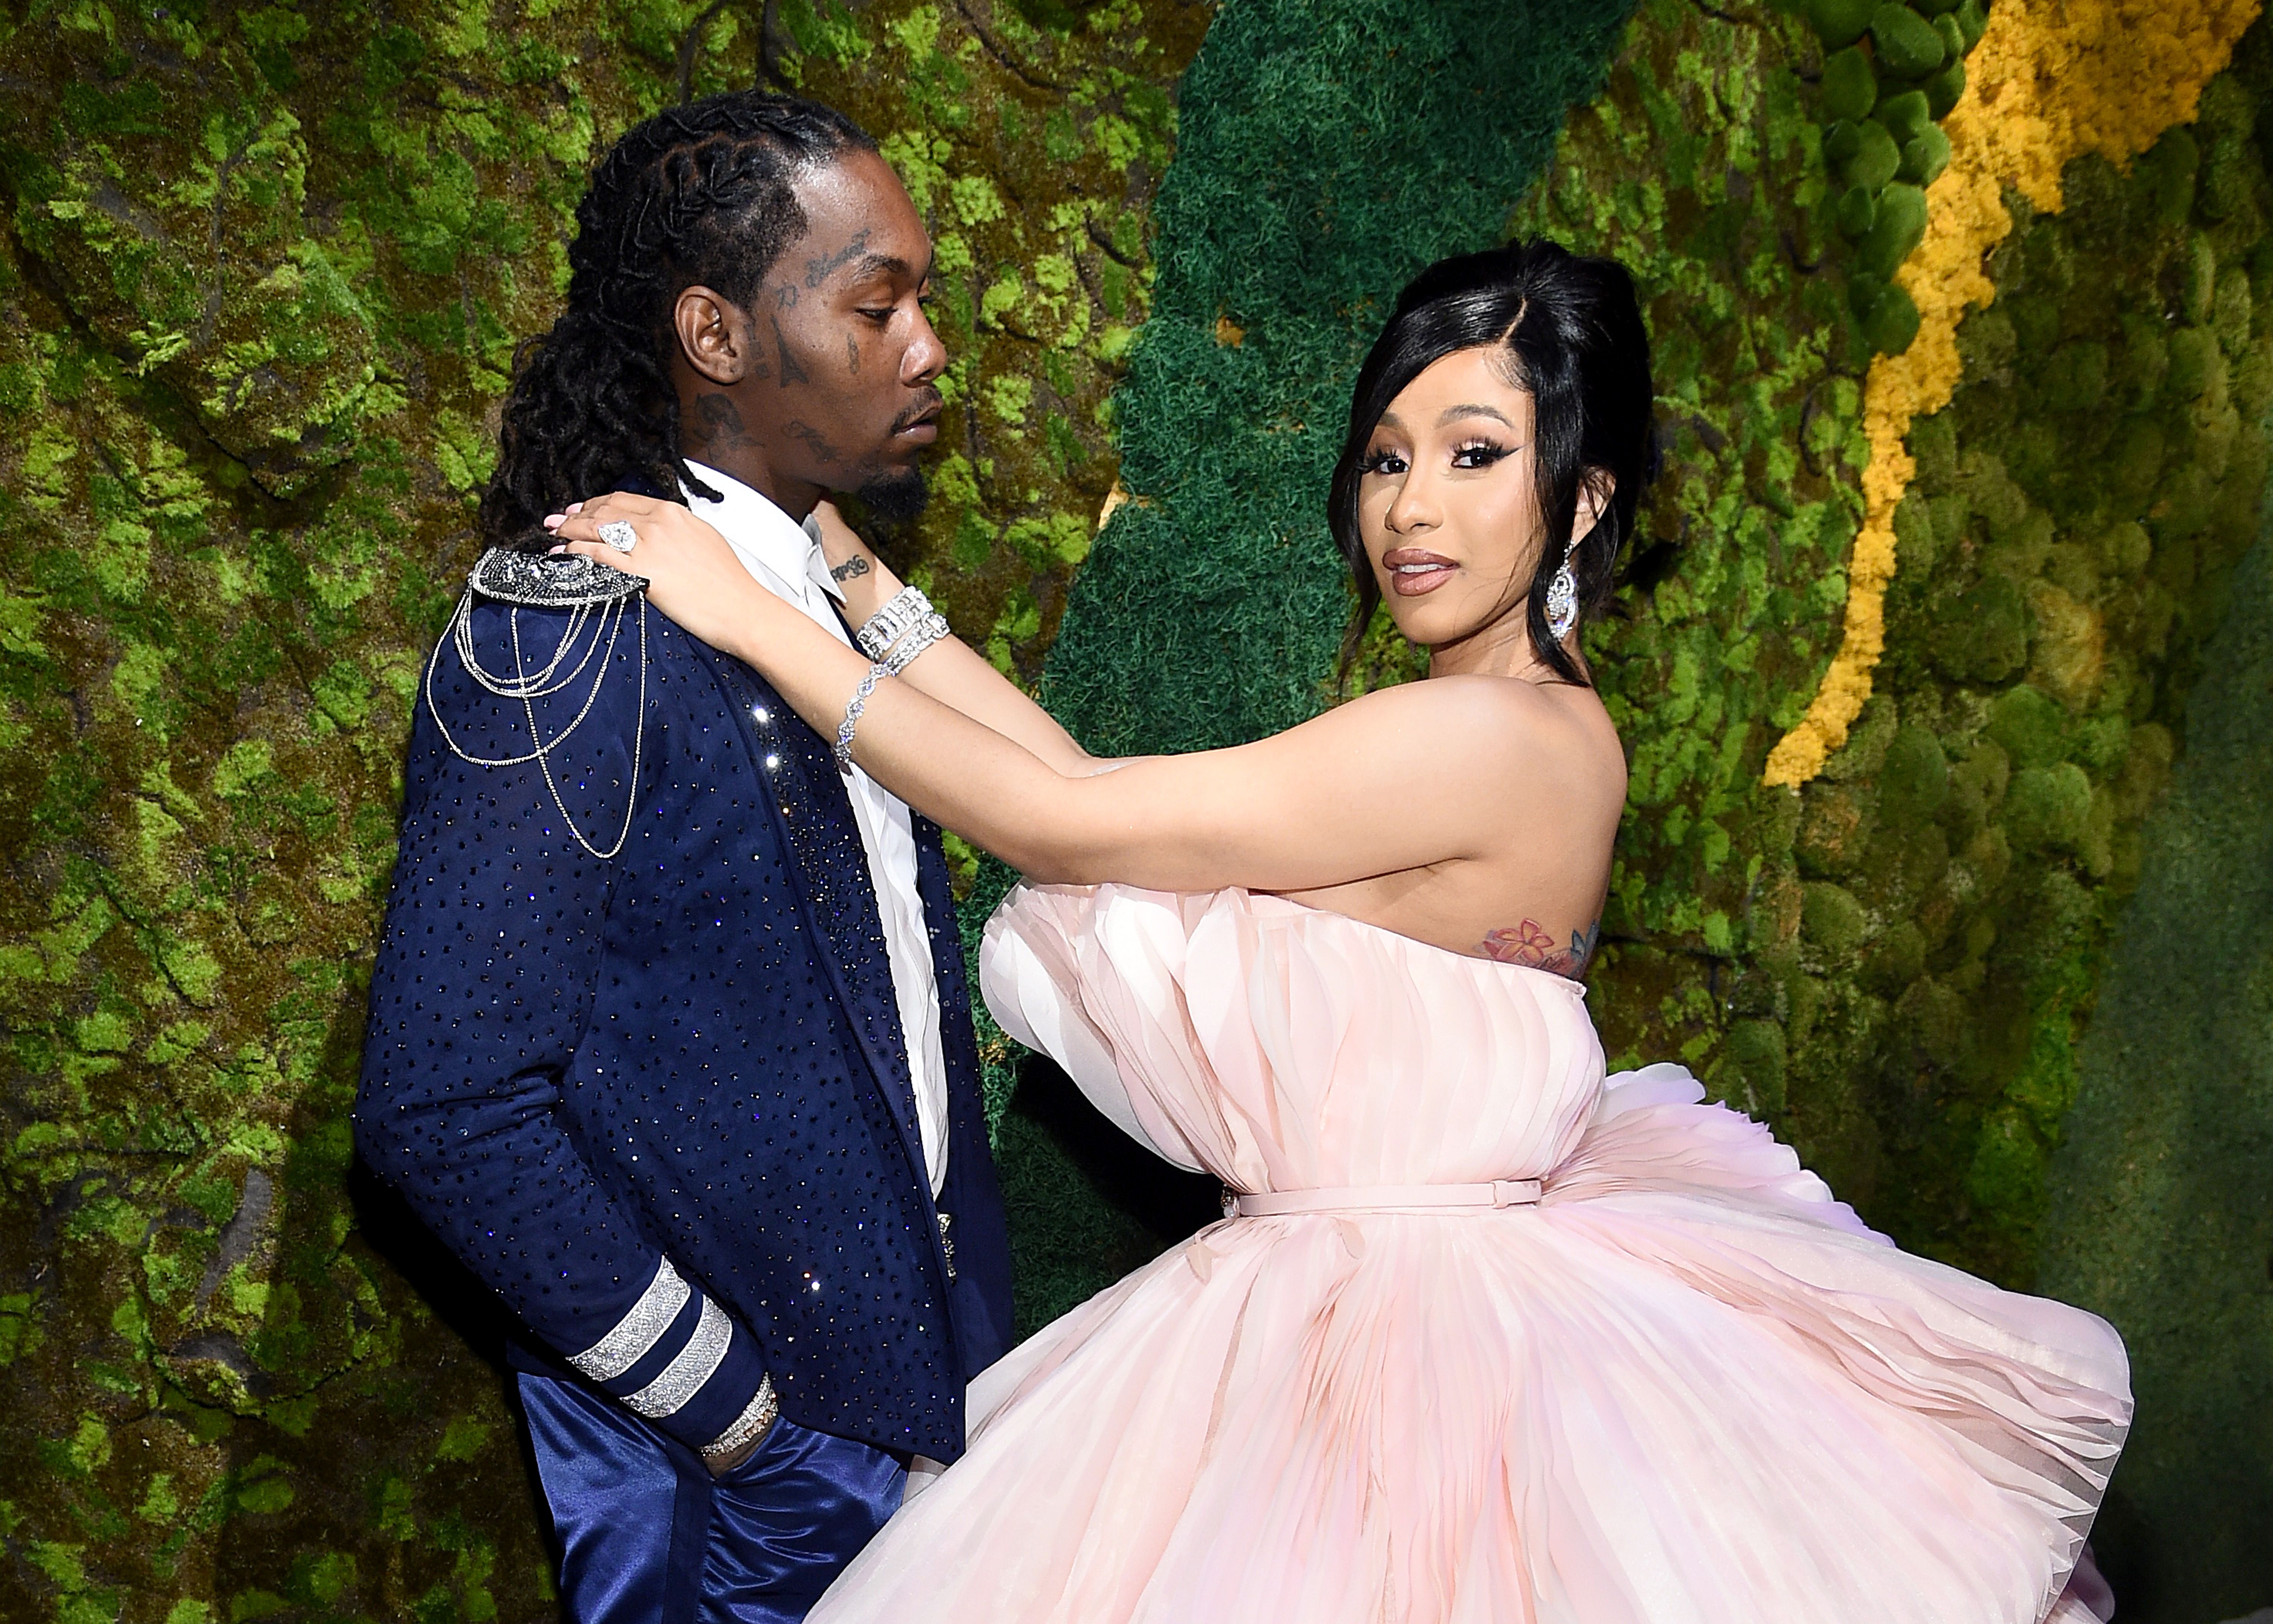 Cardi B on Why She Stayed With Offset After He Cheated